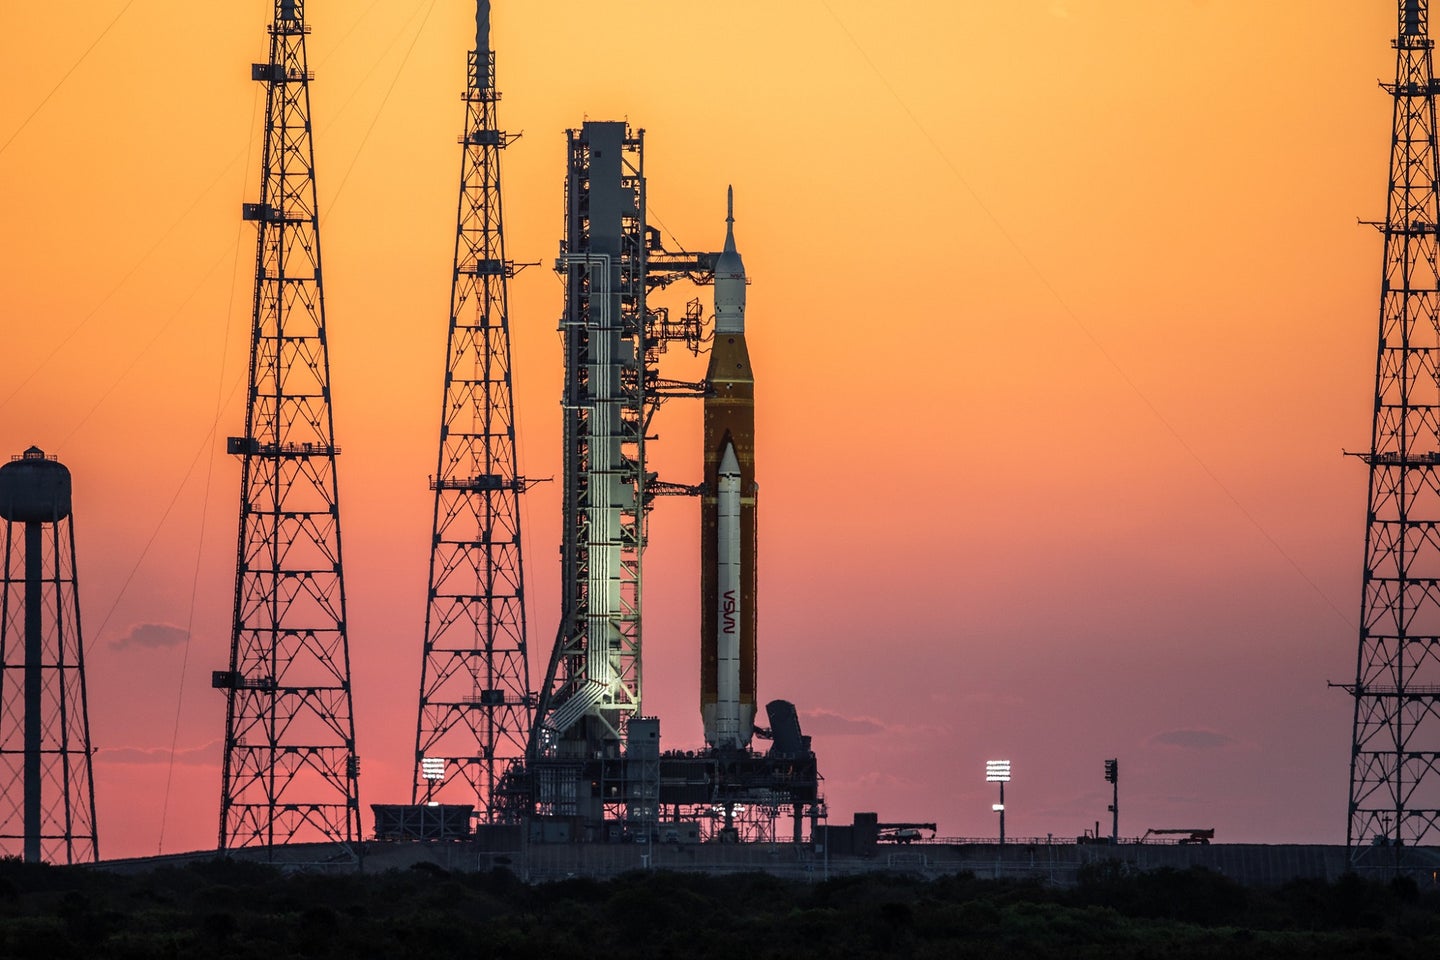 NASA SLS rocket against sunset at Kennedy Space Center launch pad before Artemis I mission